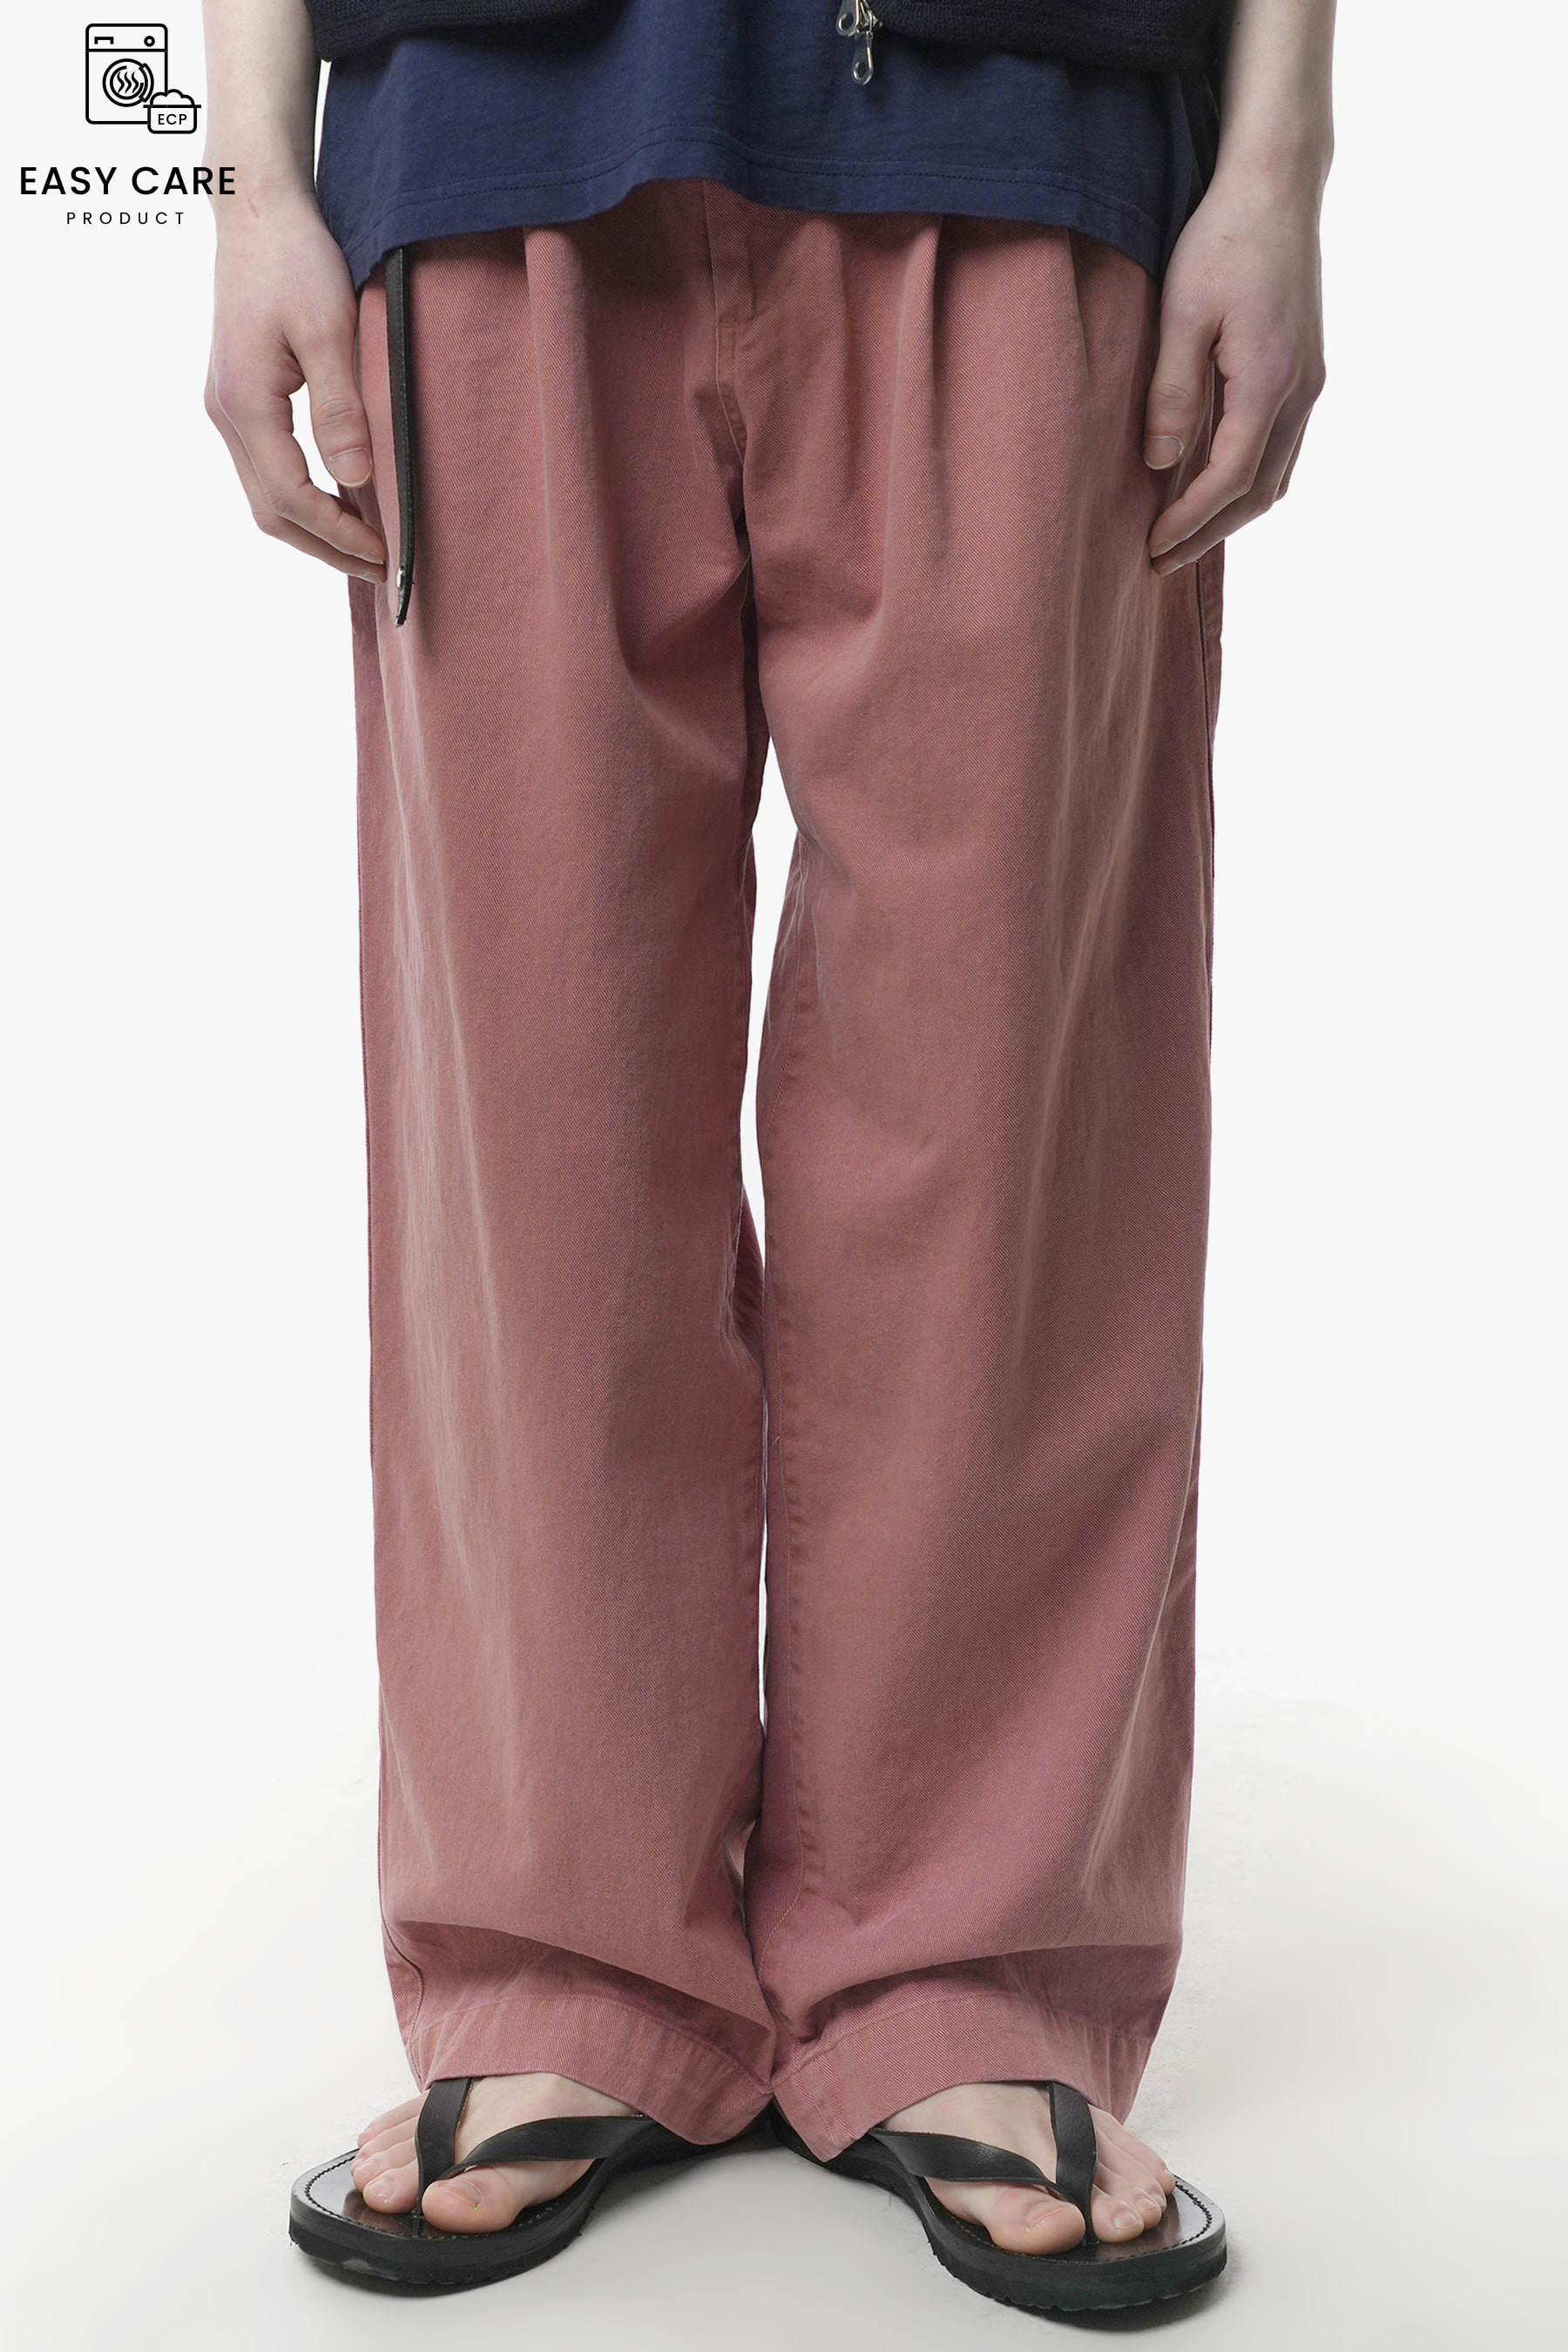 PINK Y-550 CATIONIZED COTTON DRILL WASHED CHINO PANTS (ECP GARMENT PROCESS)